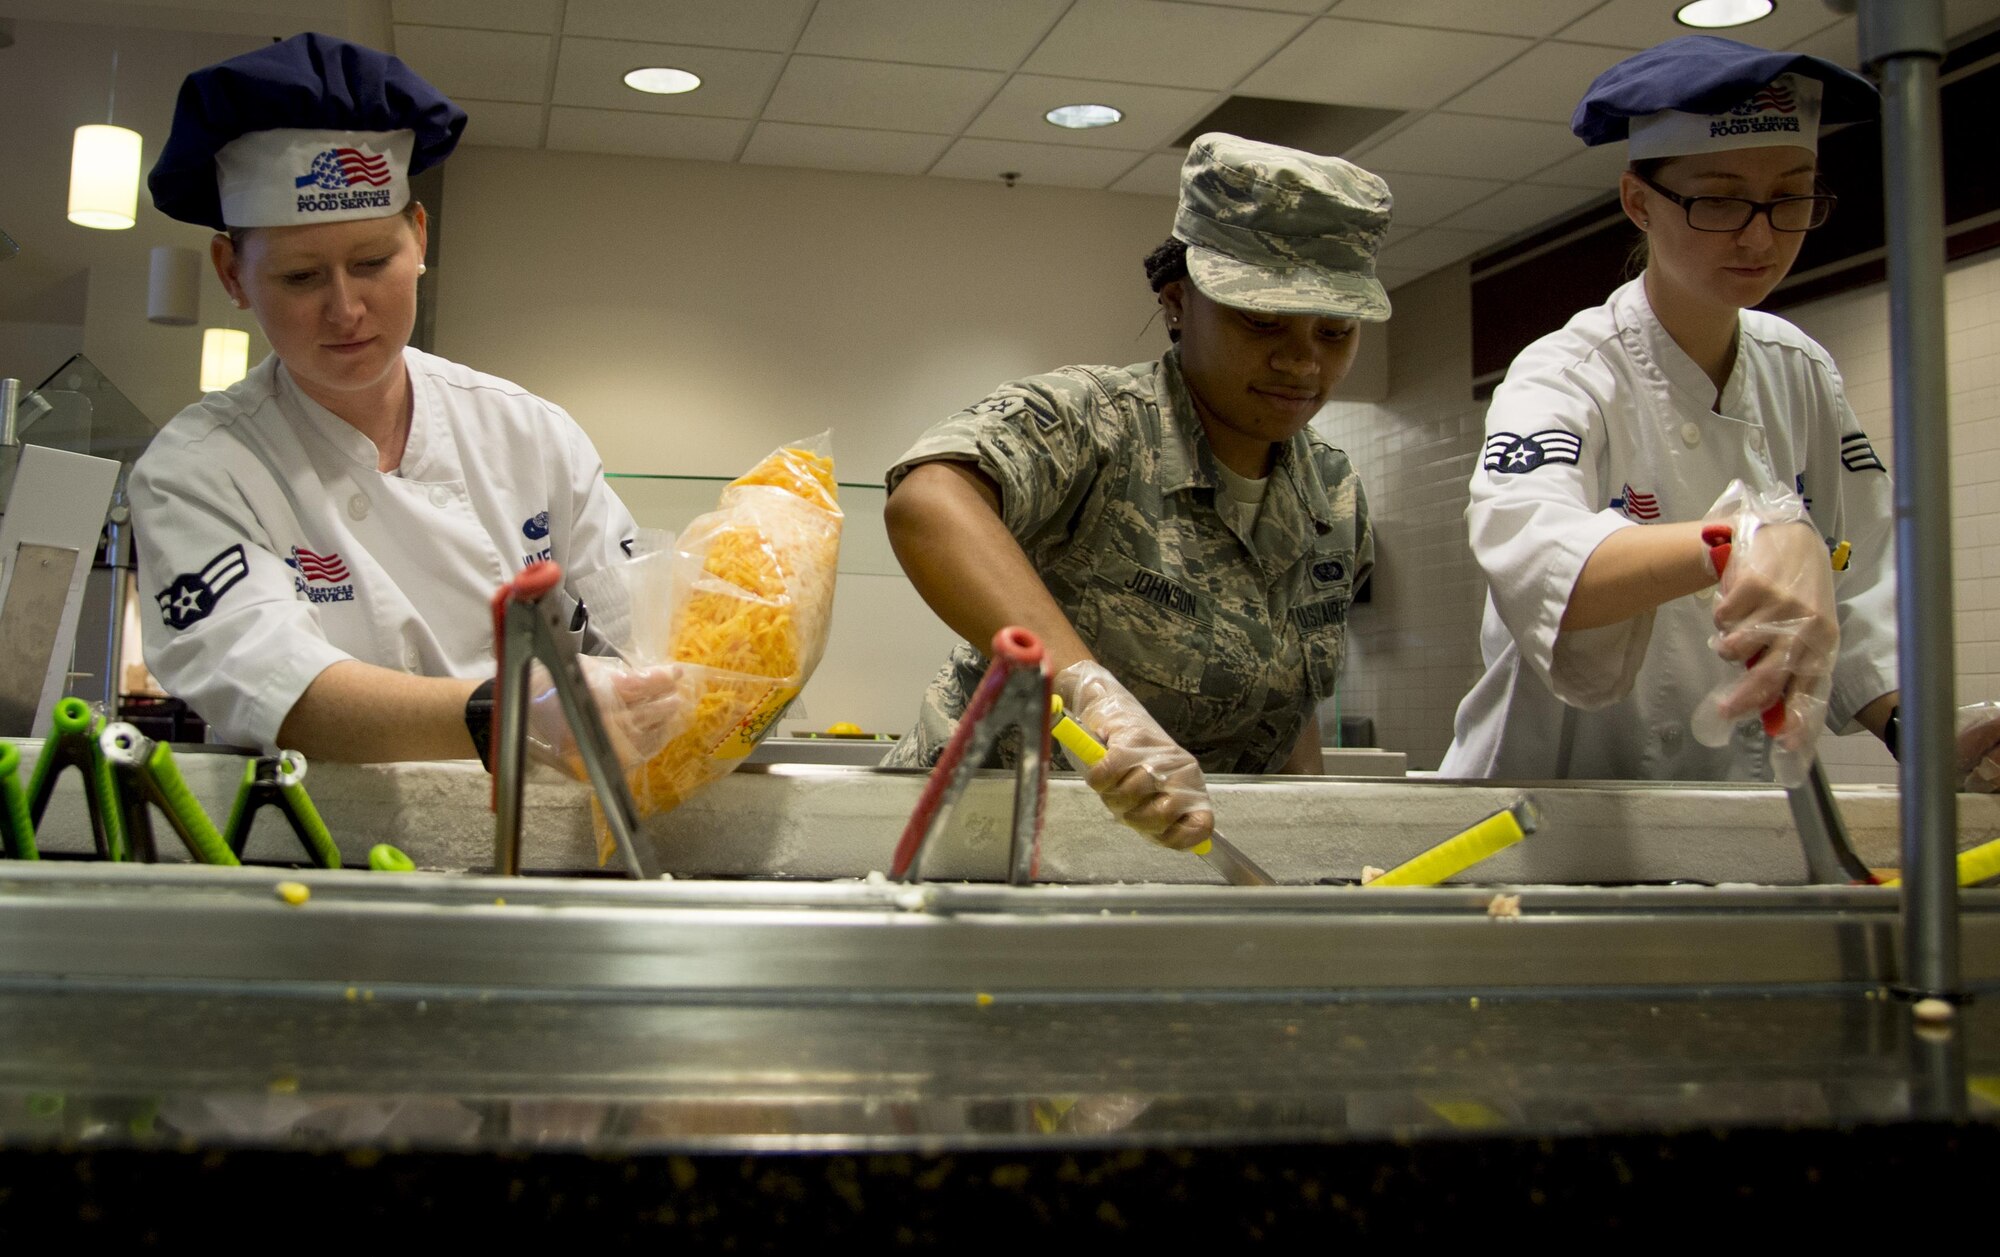 U.S. Air Force Airman 1st Class Kaeleigh Mueller, left, services journeymen, Airman 1st Class Chyna Johnson, center, a services apprentice, and Senior Airman Brandy Schaff, right, a services journeymen, all assigned to the 6th Force Support Squadron, restock the salad bar during lunch in the dining facility at MacDill Air Force Base, Fla., Oct. 19, 2017. The MacDill dining facility provides various food options to their customers including a salad bar, to-go items and hot food selections. (U.S. Air Force photo by Senior Airman Mariette Adams)